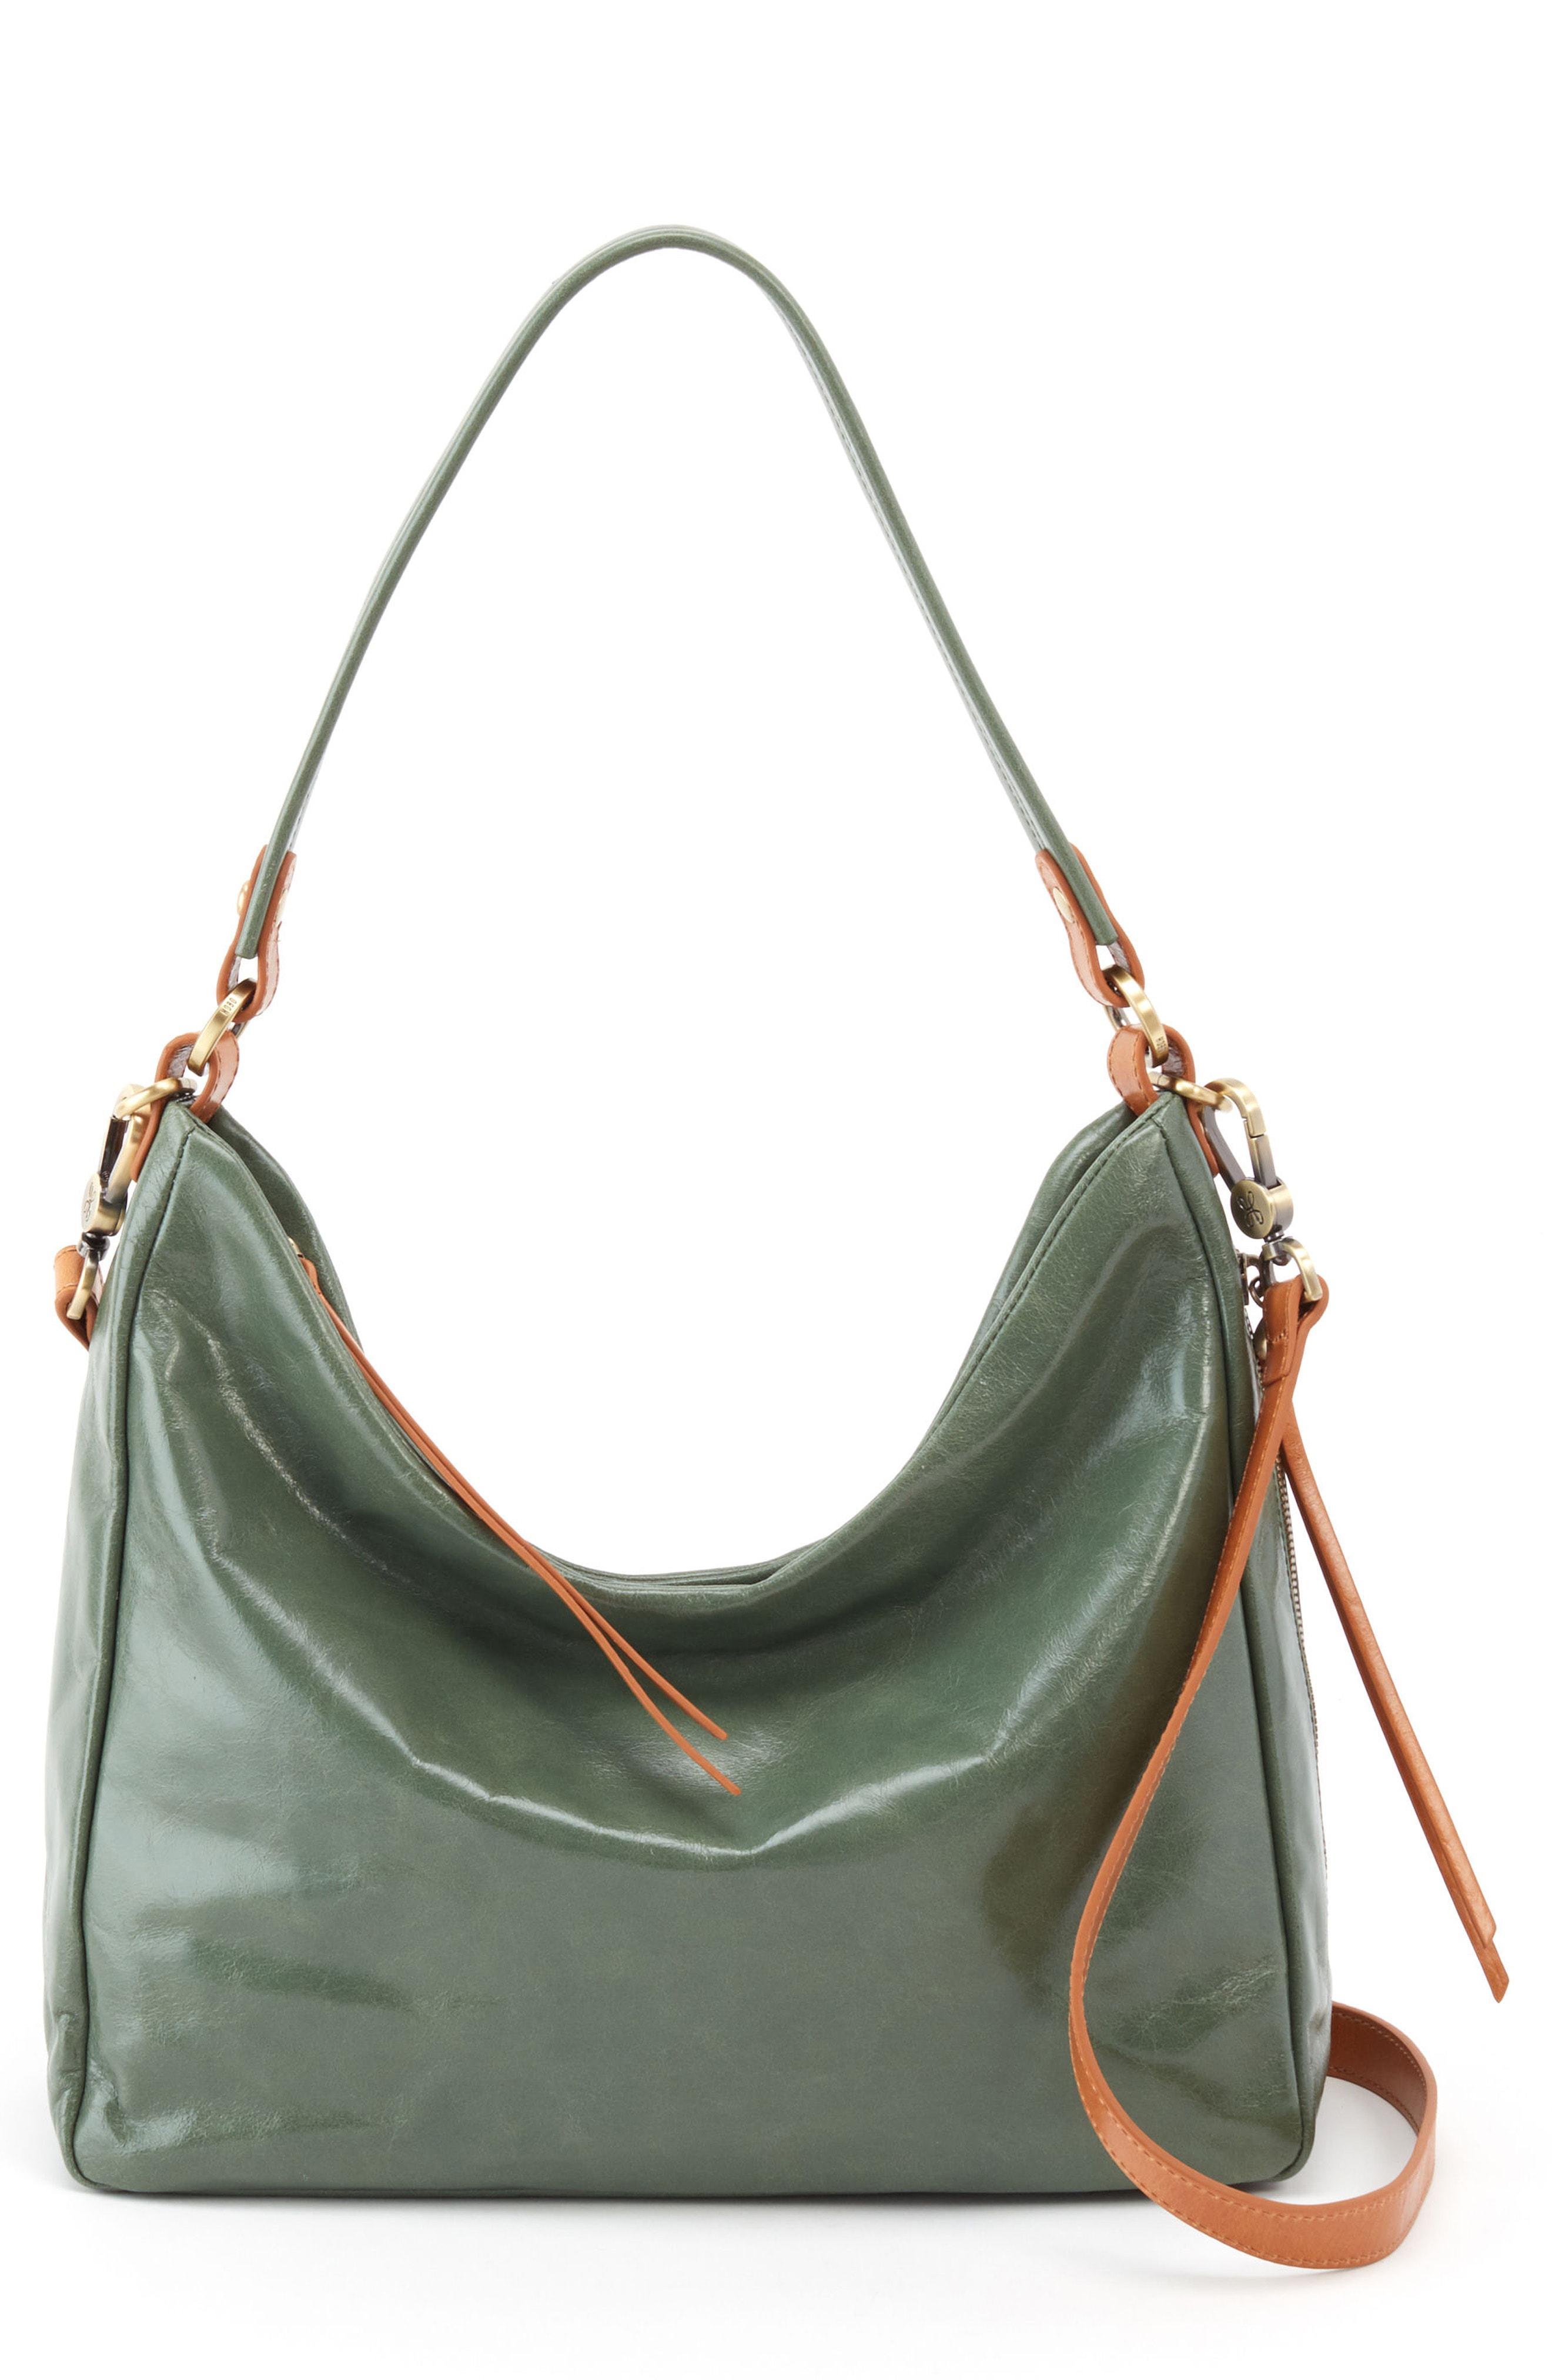 Hobo Leather Delilah Convertible Bag in Moss (Green) - Lyst